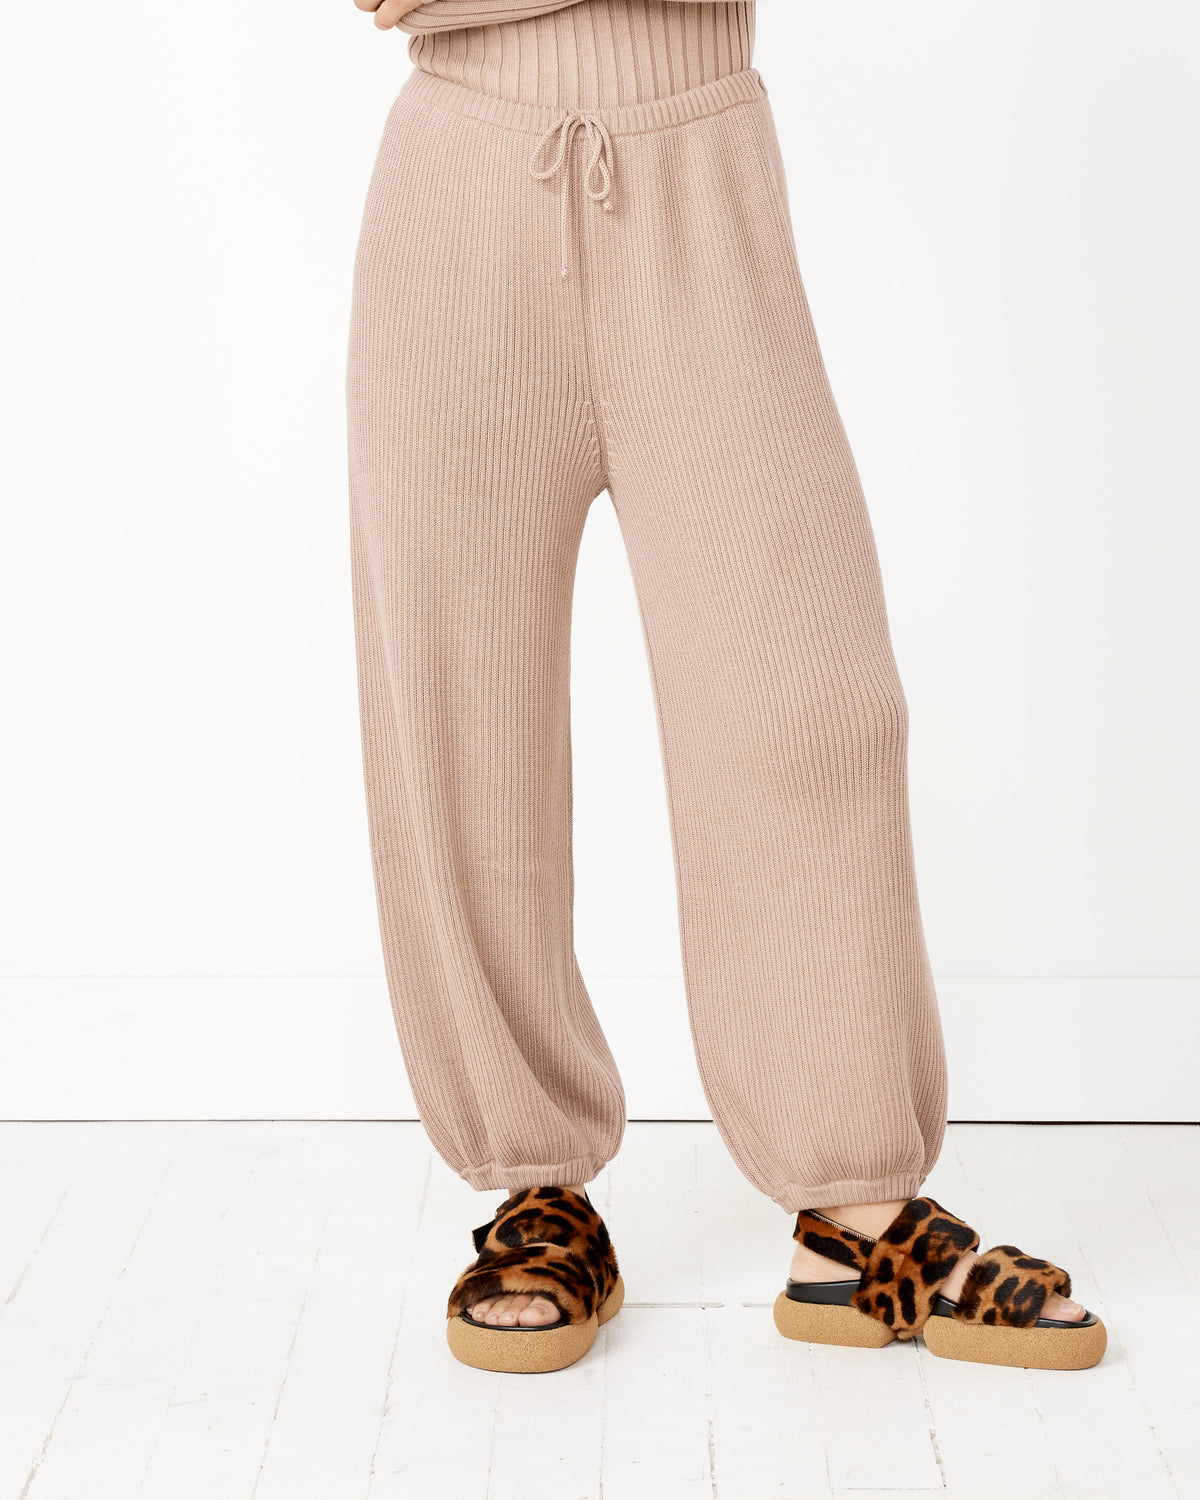 Yves Dance Pant Misha & Puff Buy with Confidence and Experience